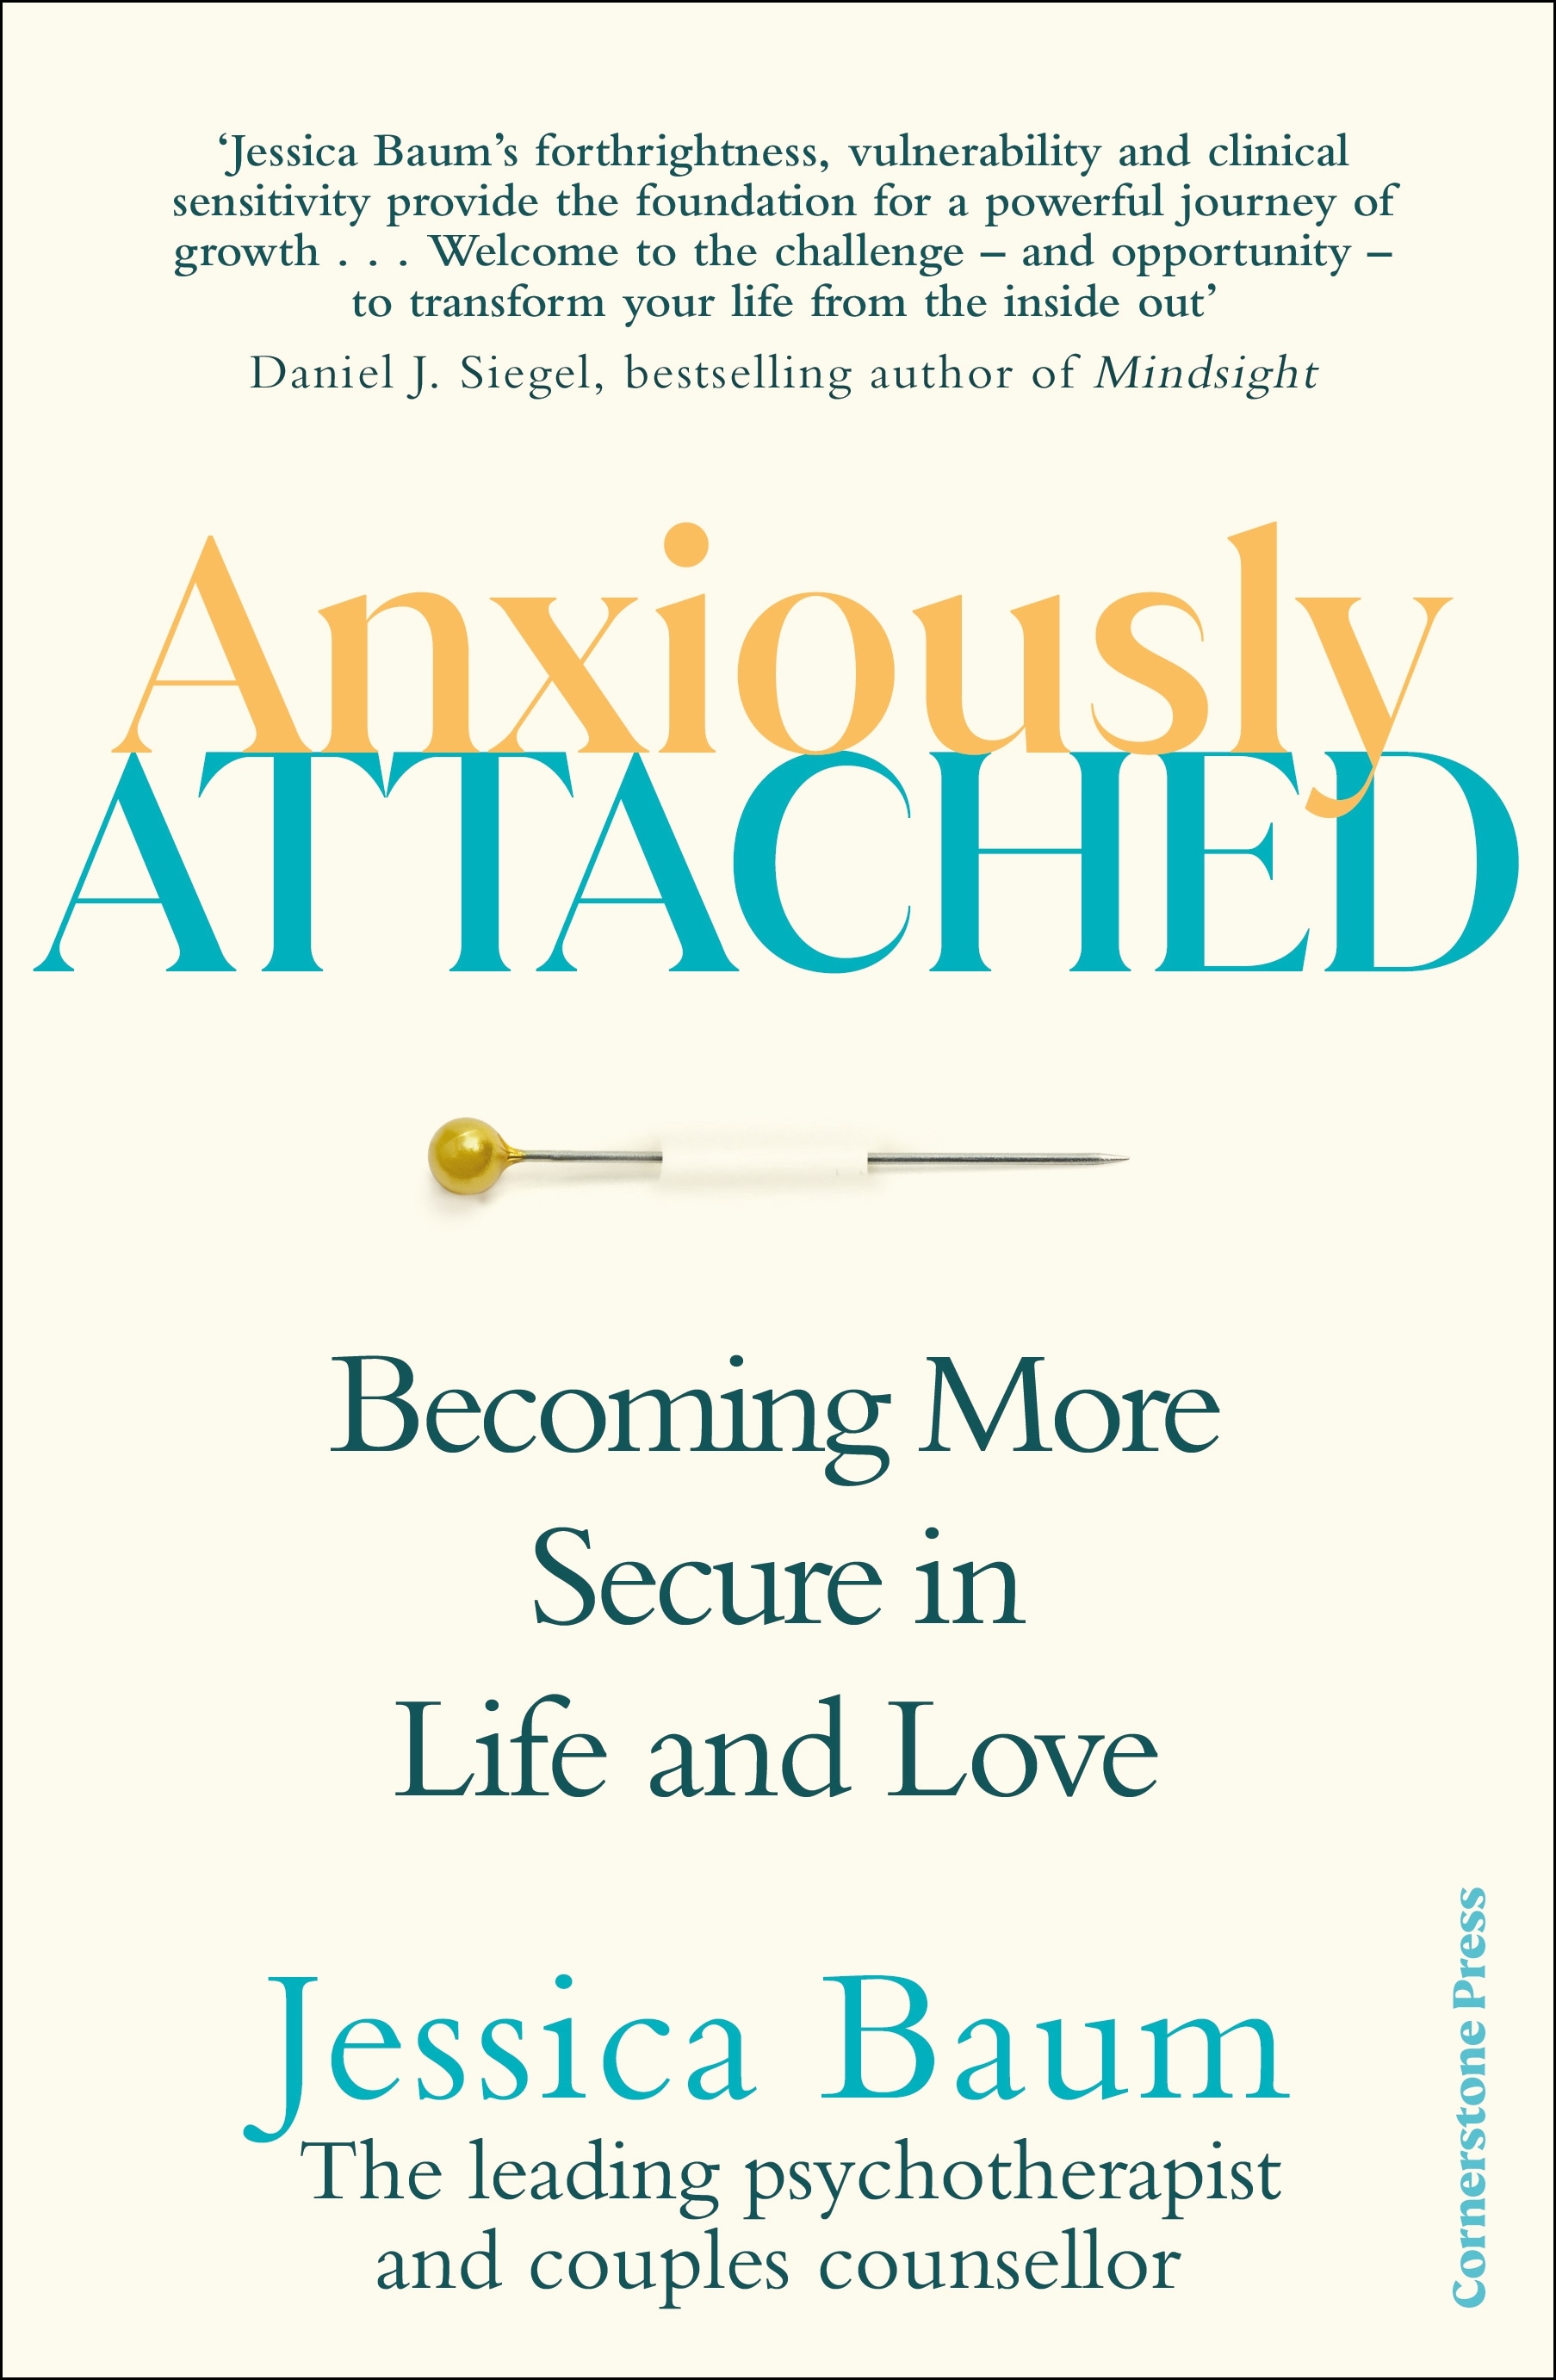 Book “Anxiously Attached” by Jessica Baum — June 16, 2022